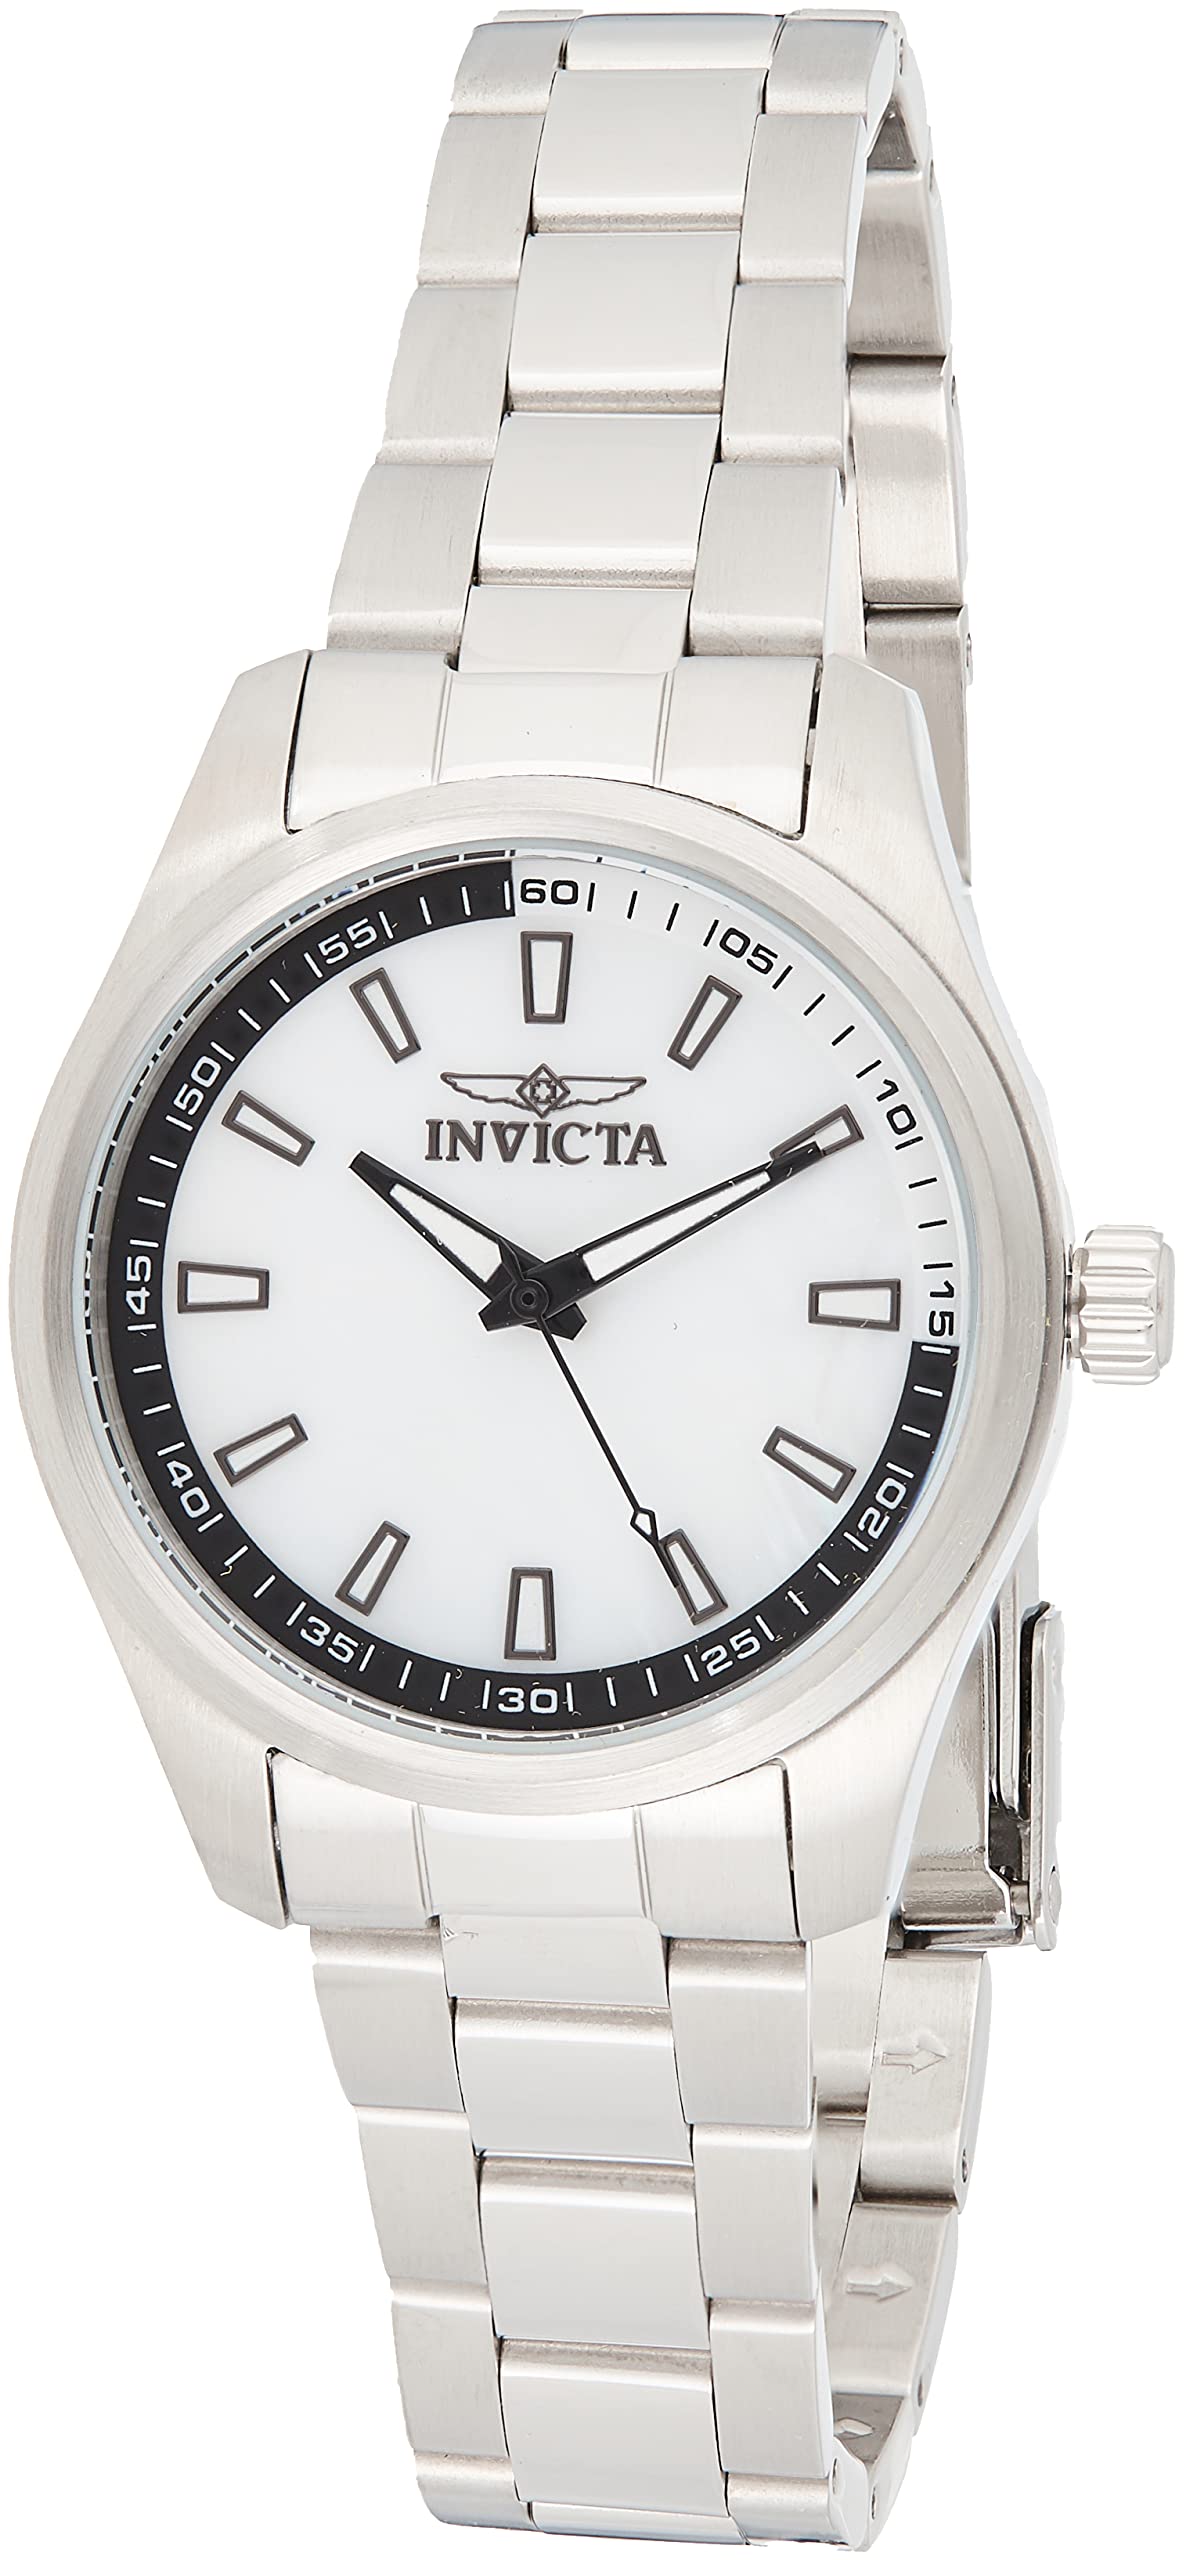 Invicta Women's 12830 Specialty Mother-Of-Pearl Dial Watch